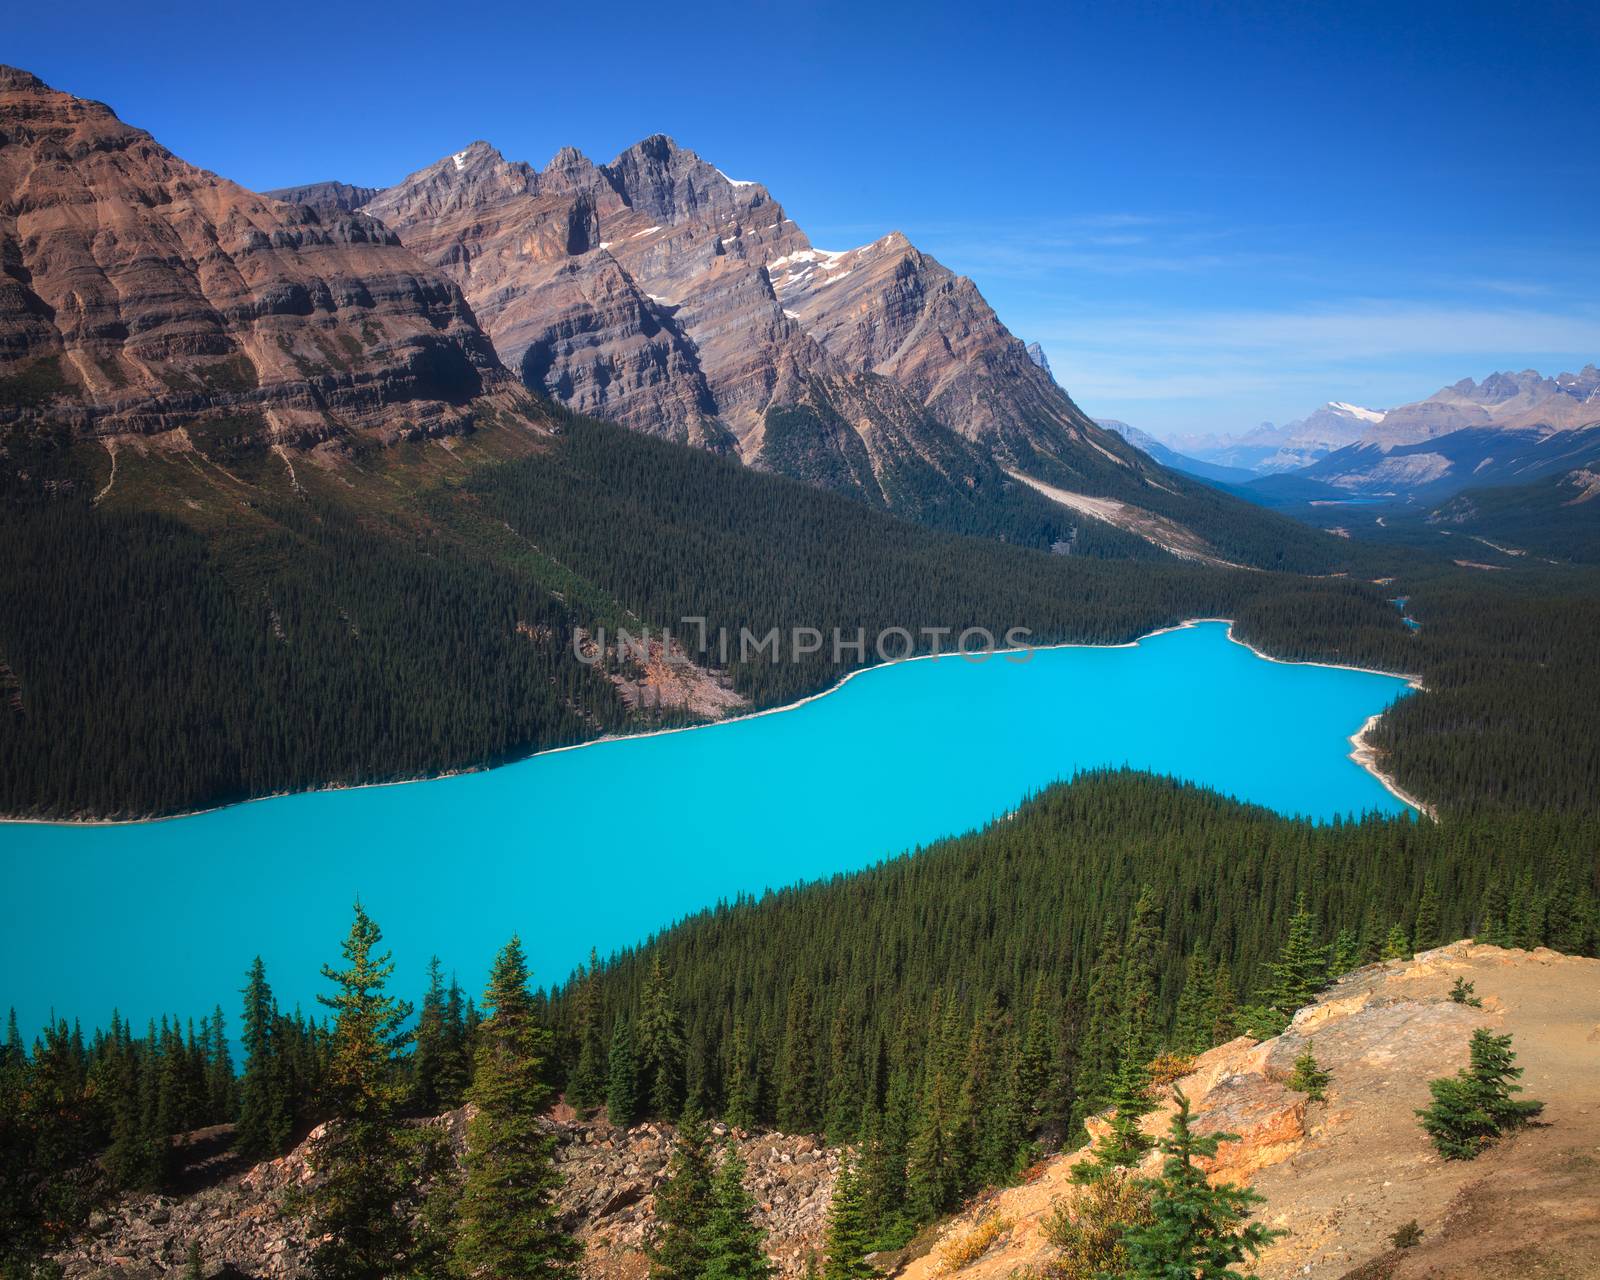 Peyto is a glaciated lake in Banff Alberta Canada. It gets it's color from the sediments of the glacier melt.